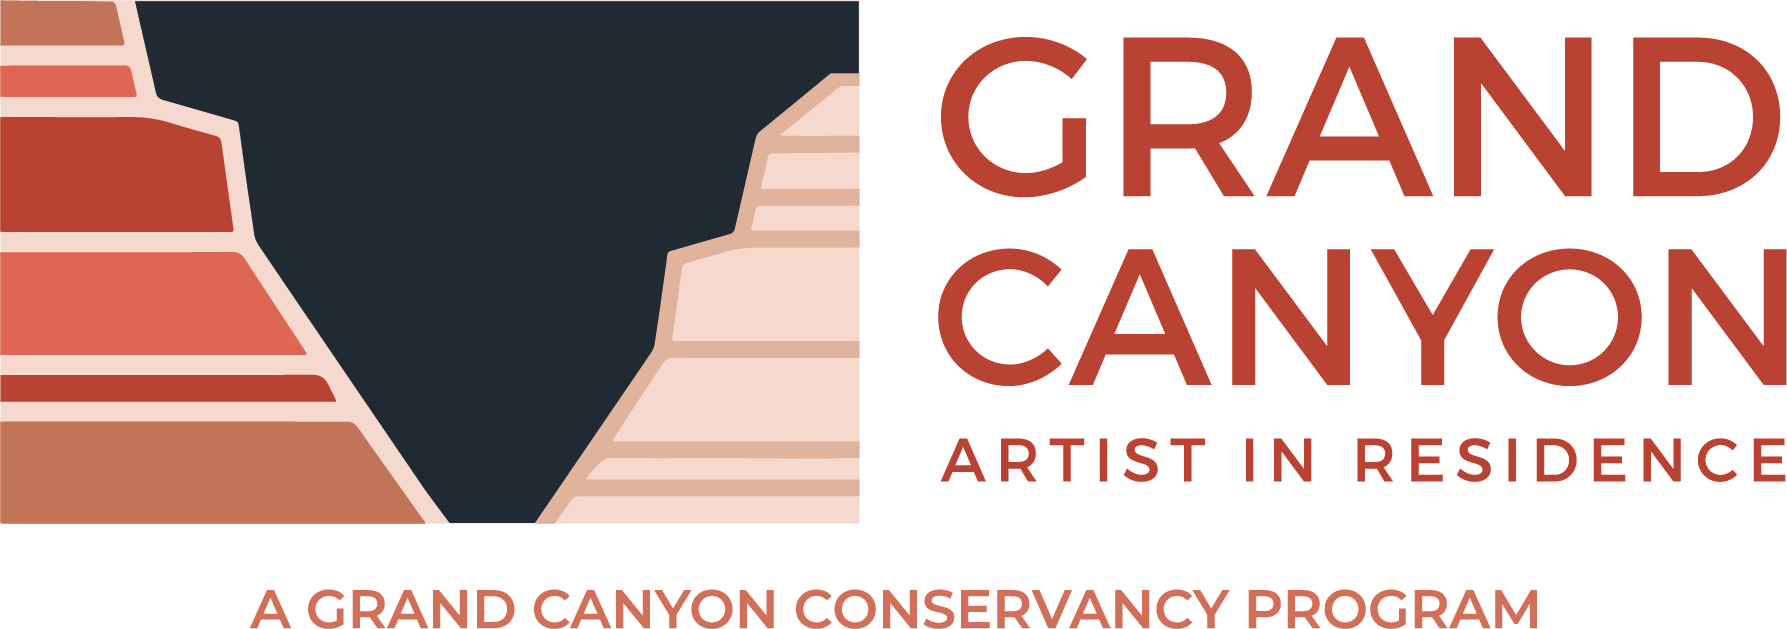 Stylized graphic with bands of rust and vermilion color representing the rock layers that make up canyon walls. Text reads: "Grand Canyon Artist in Residence, a Grand Canyon Conservancy Program"